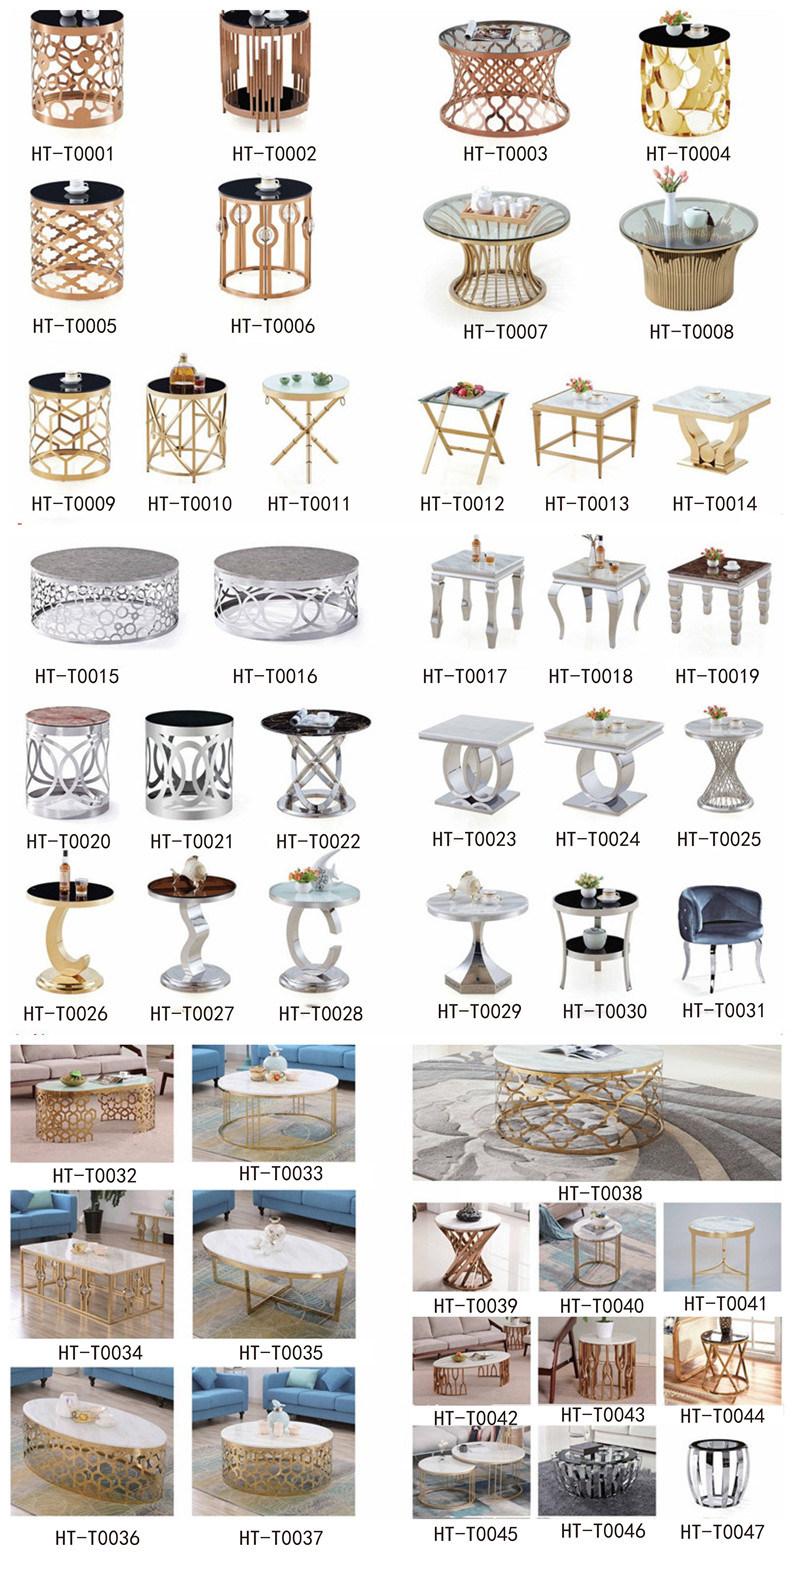 Modern Coffee Table Wholesale Wedding Decoration Clear Charge Plates Metal Table Wedding Table Console Table